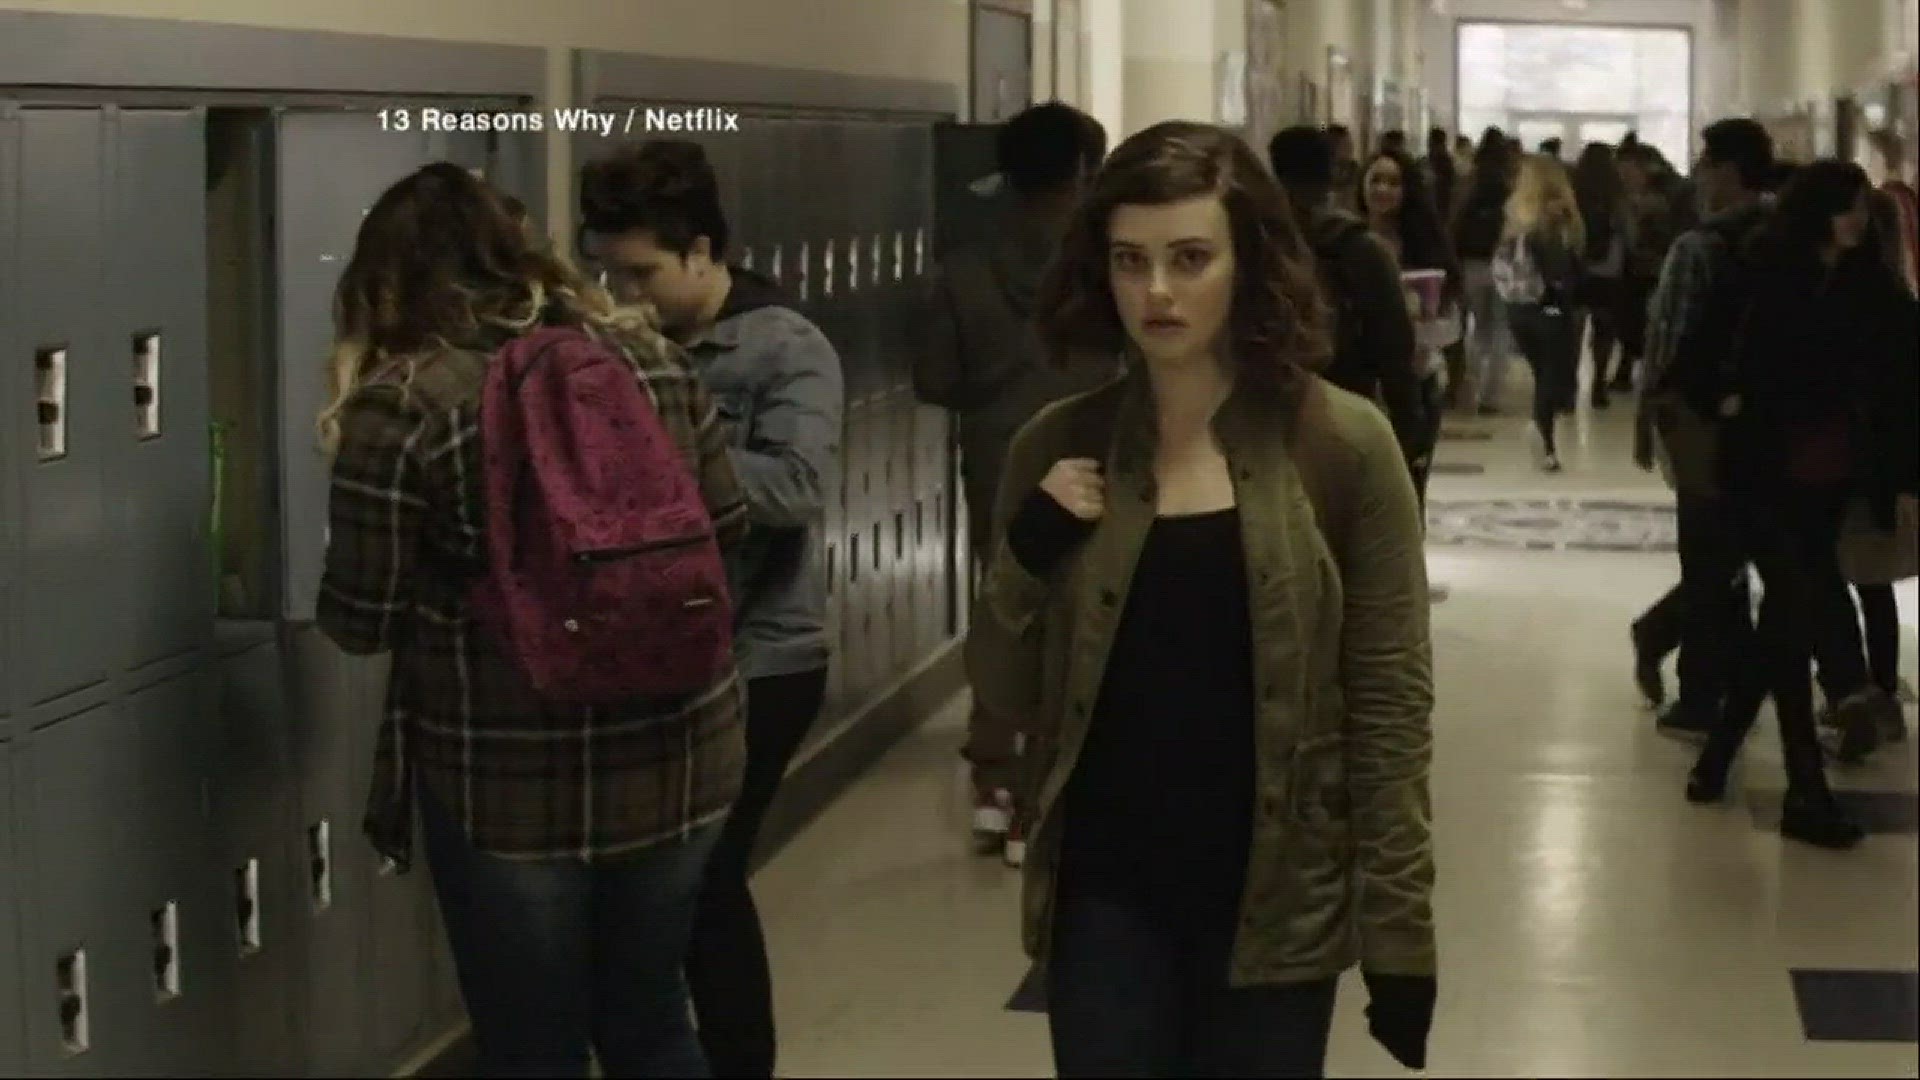 School's reactions to '13 Reasons Why'